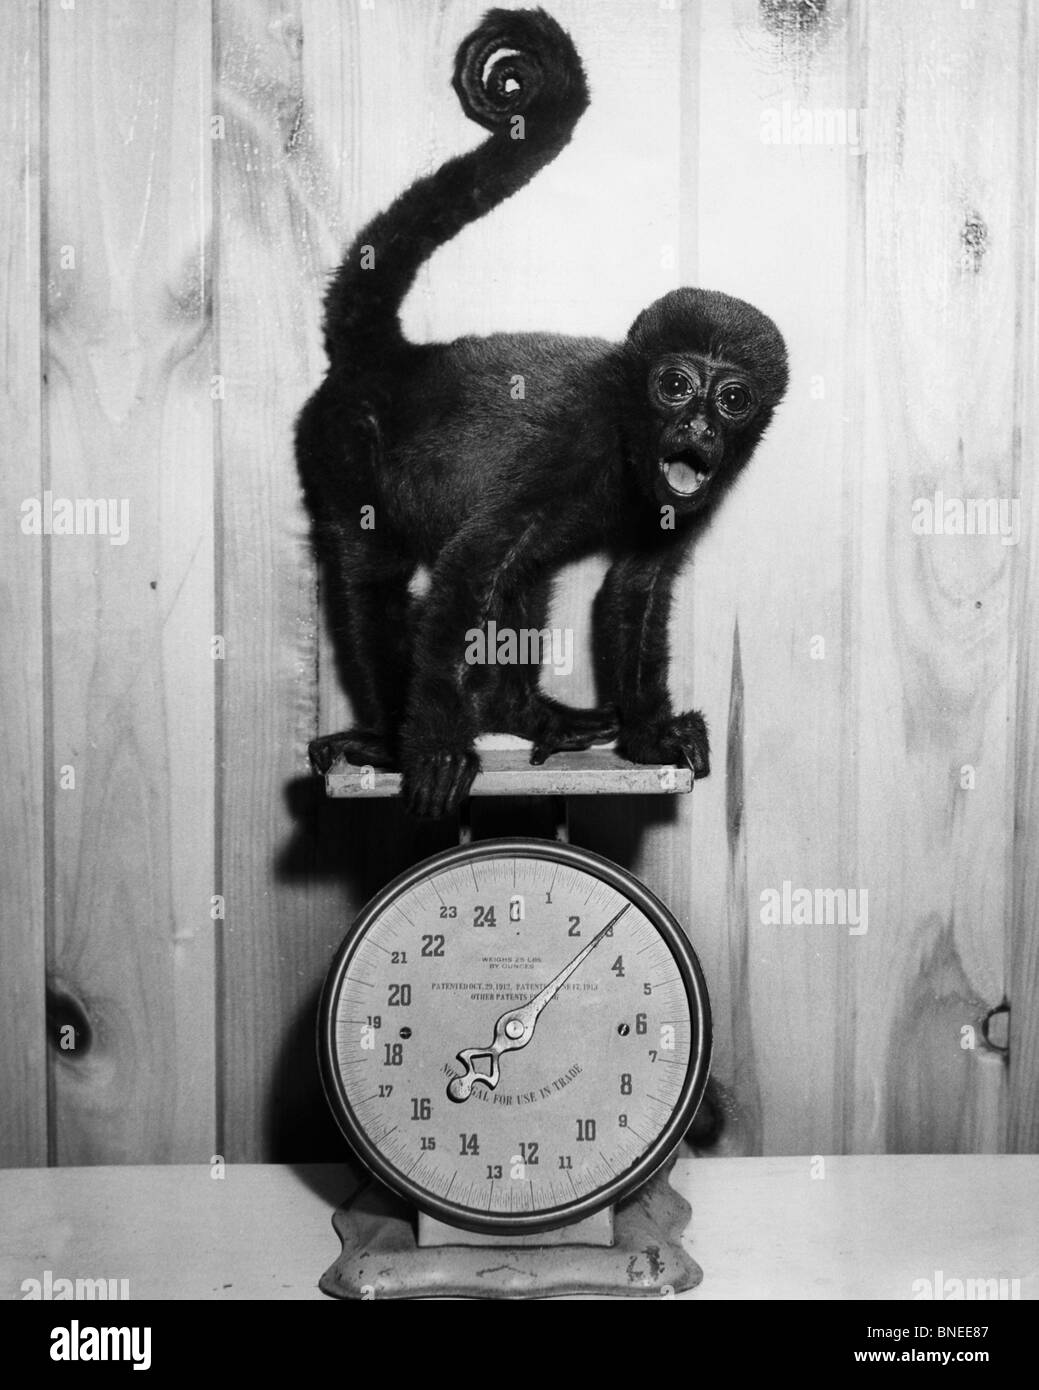 Monkey on weight scales Stock Photo